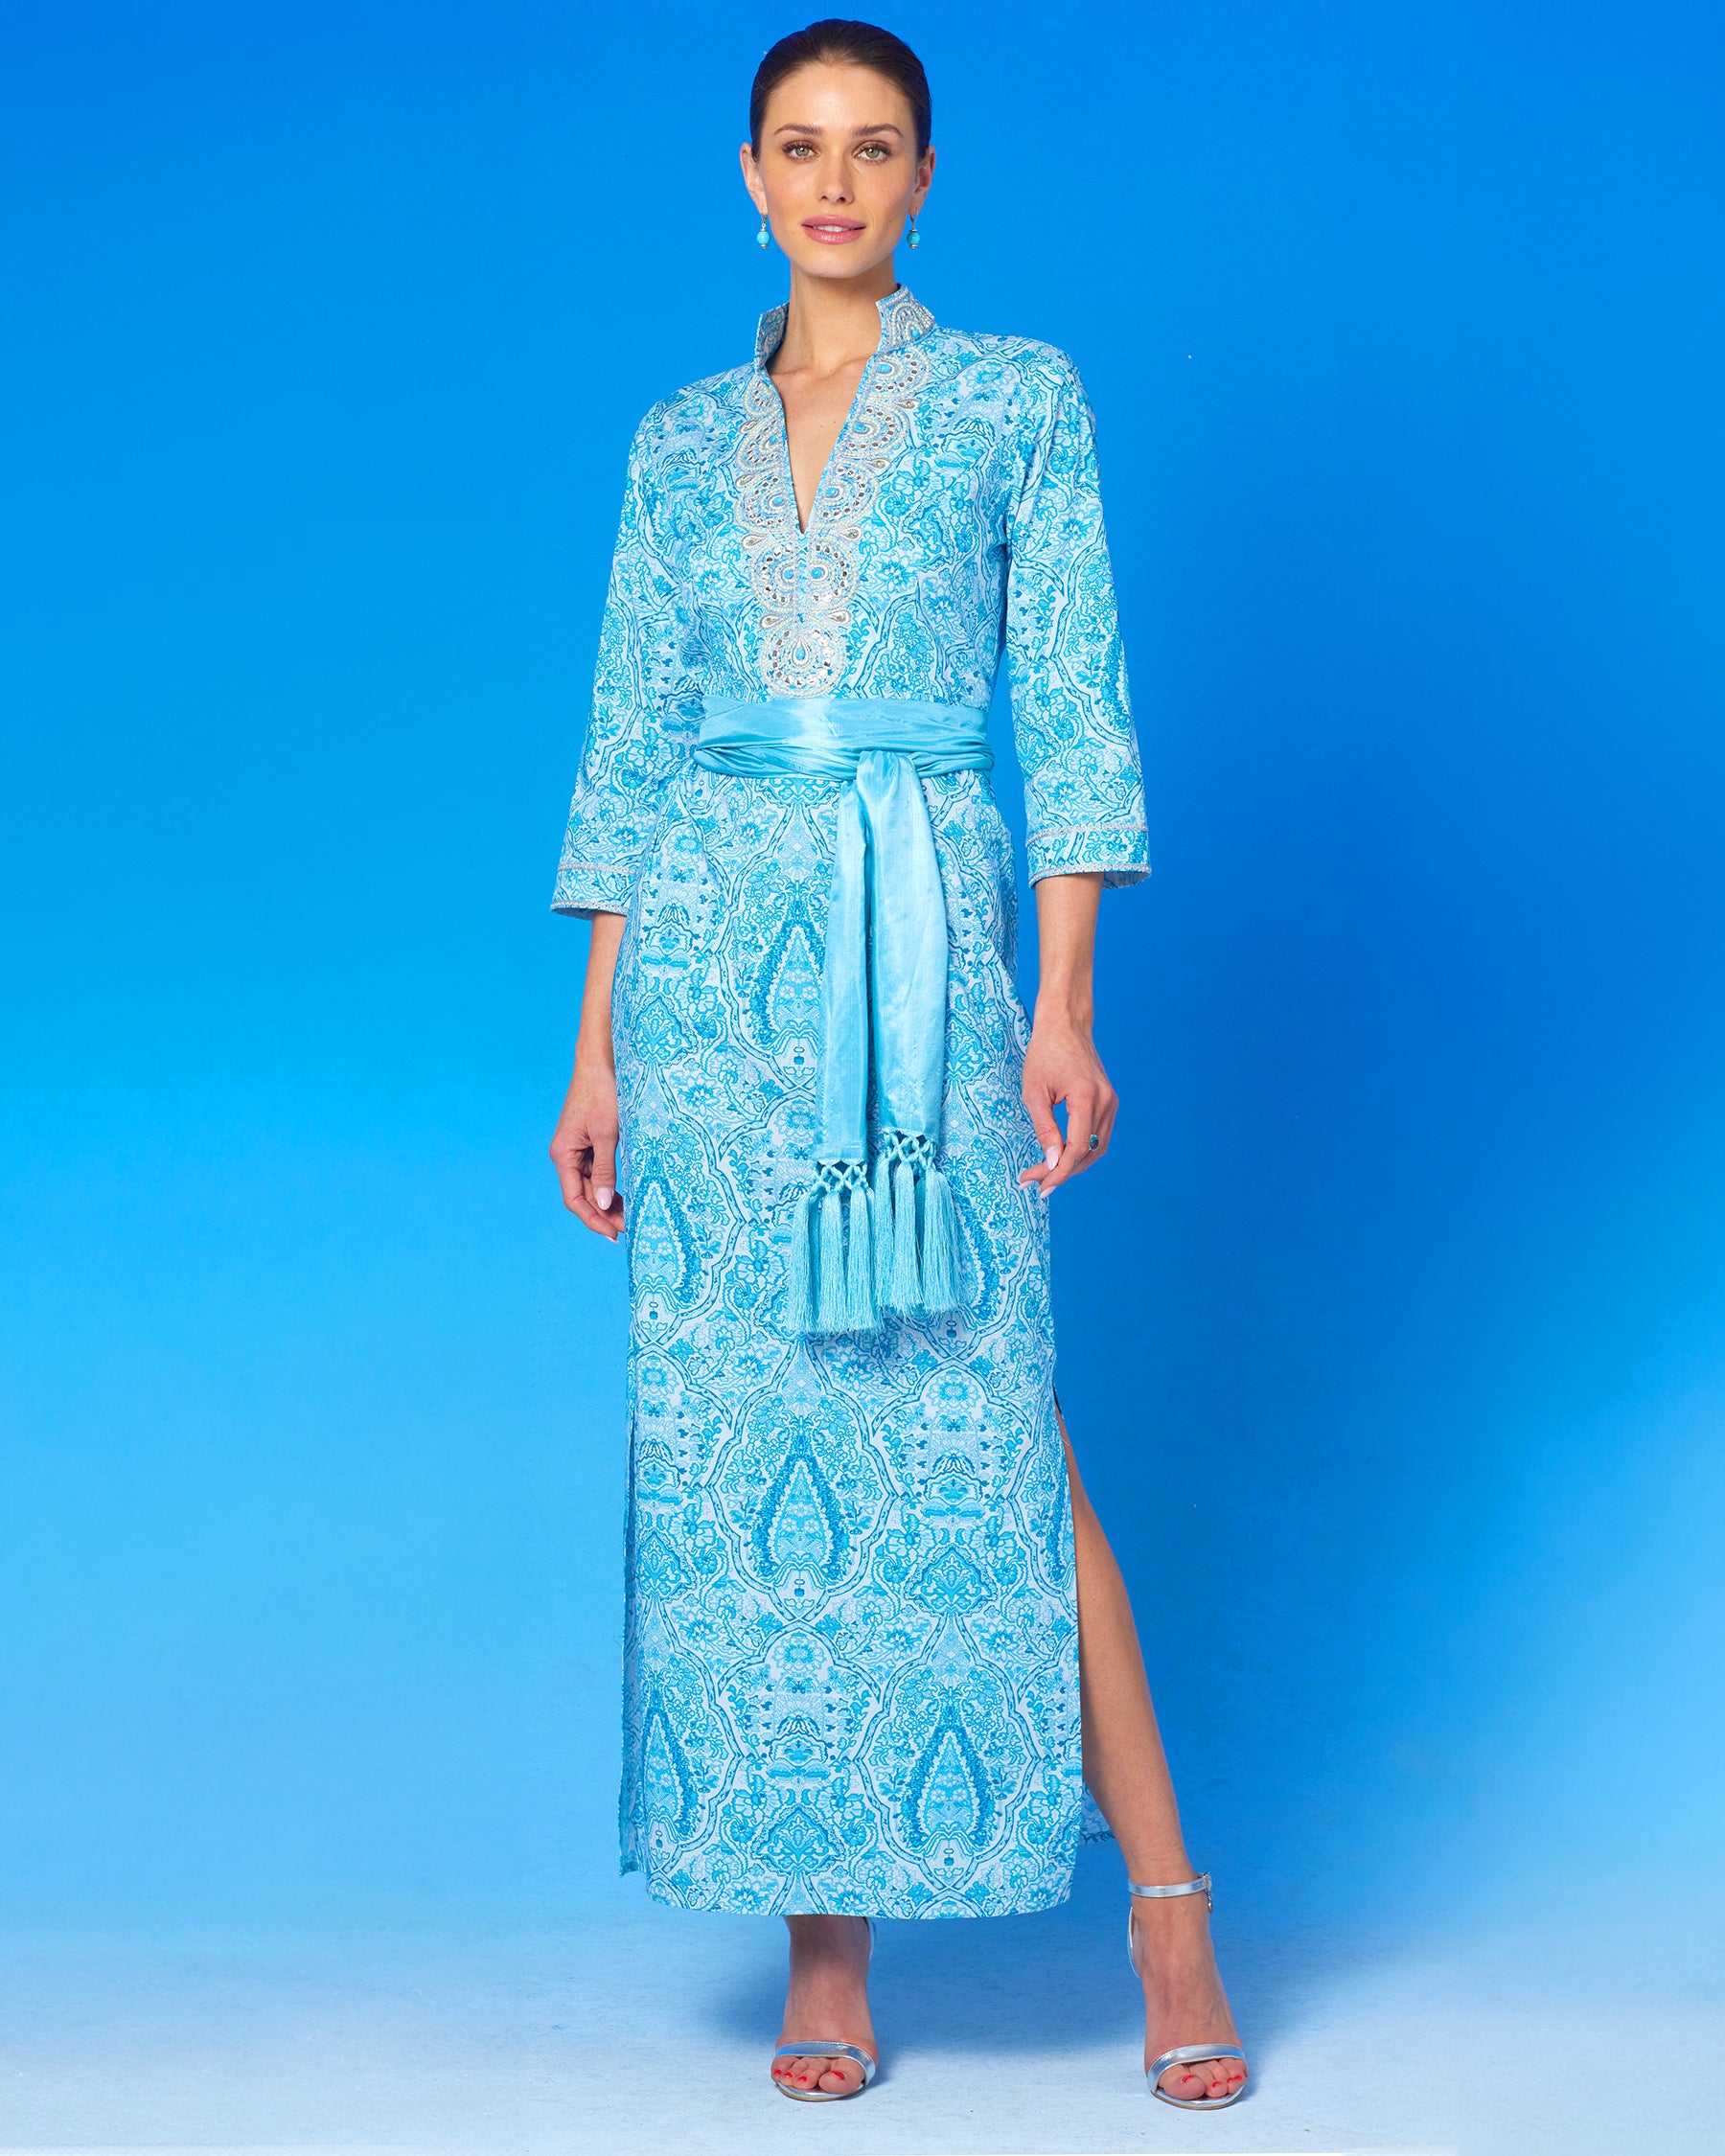 Noor Long Tunic Dress in Turquoise Paisley and Silver Embellishment with waist cinched with the Cosima Turquoise Sash Belt-front view standing